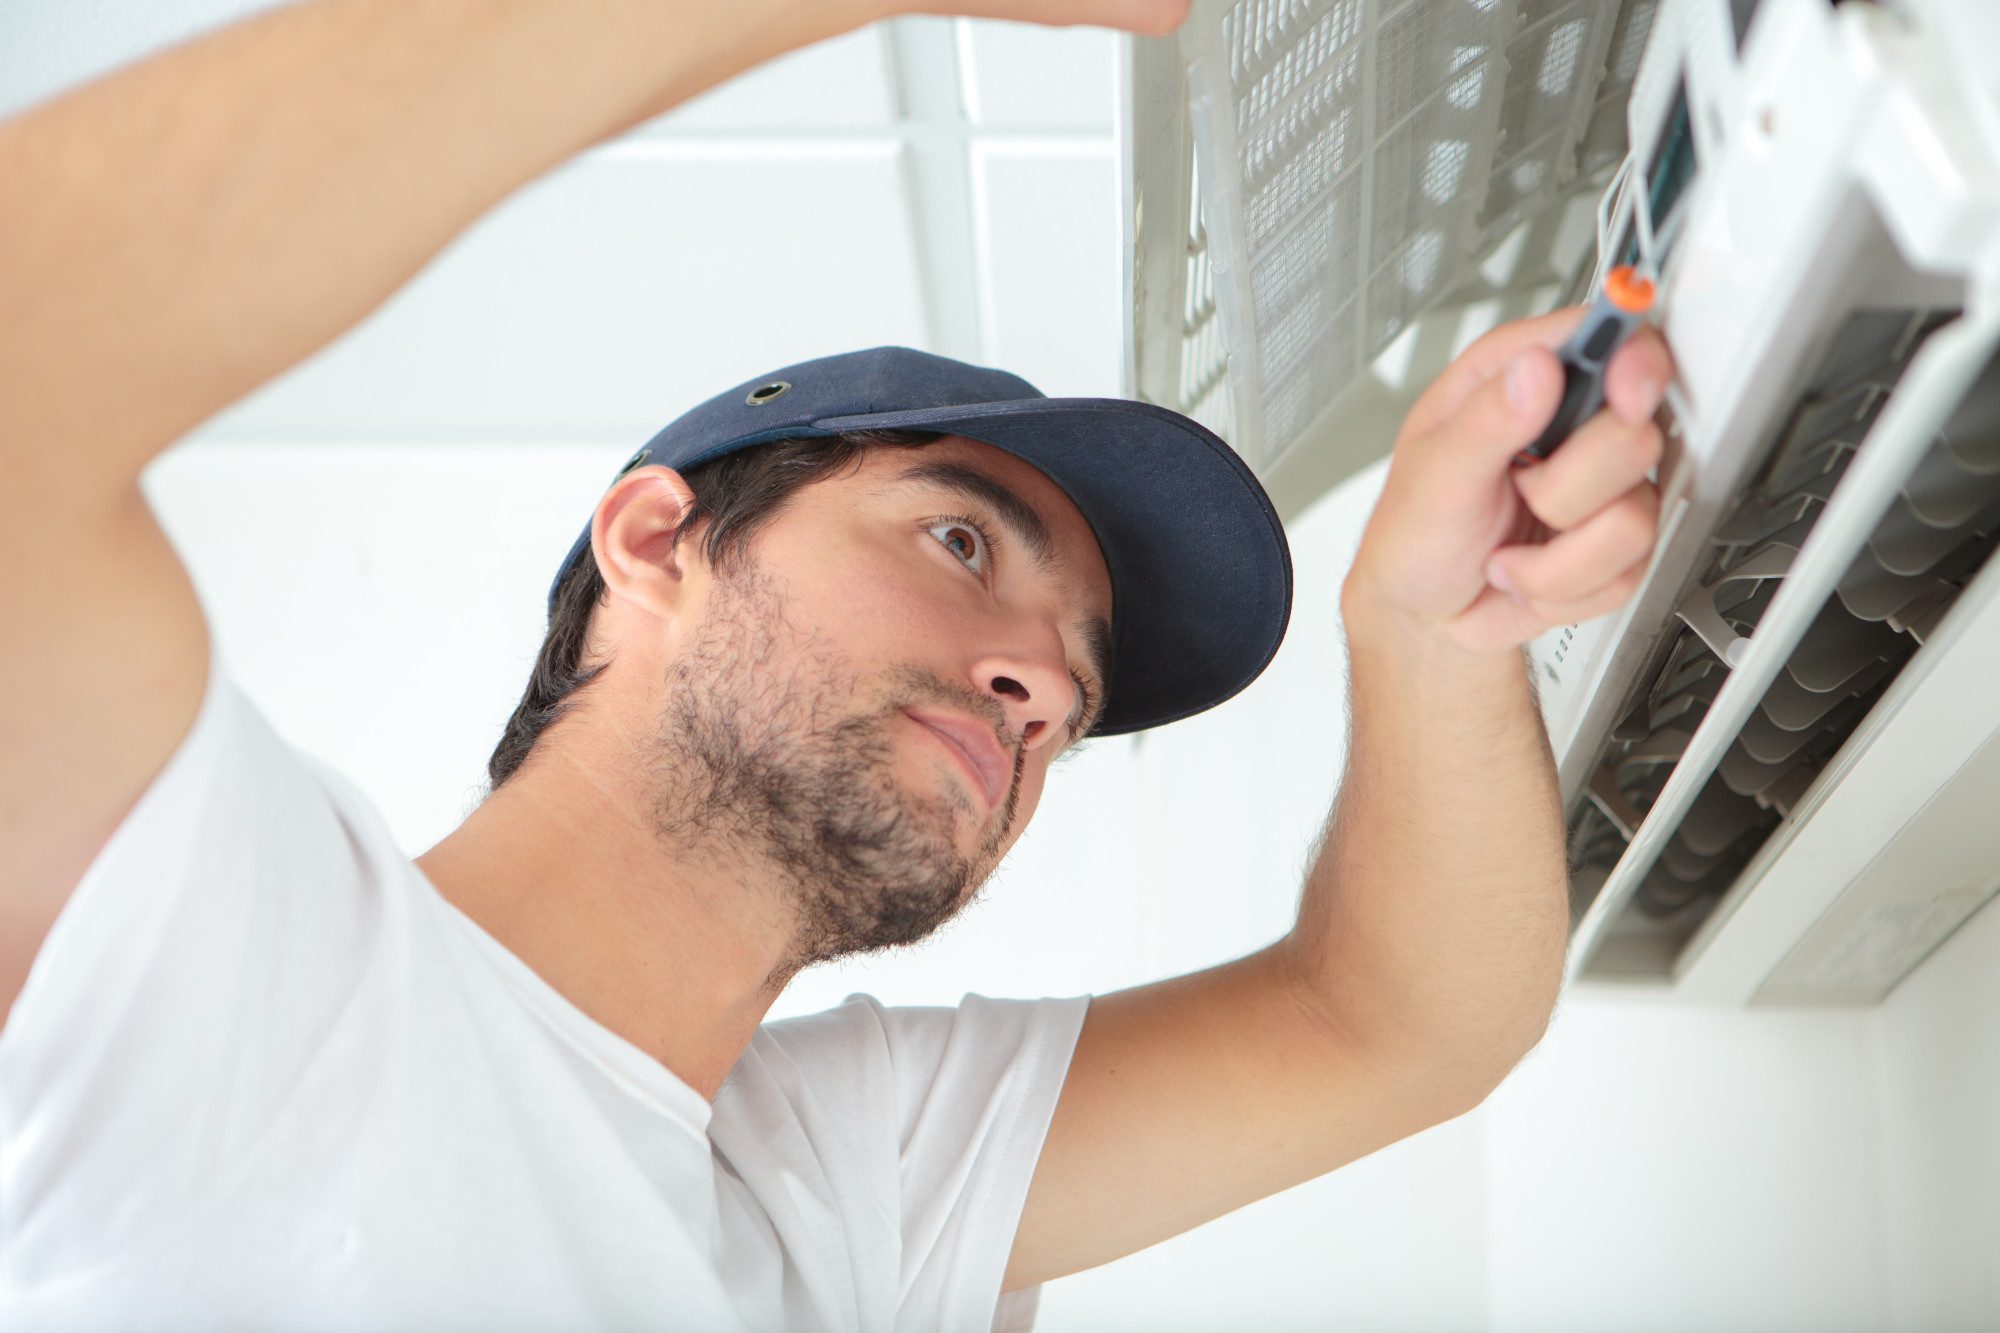 heating and cooling maintenance